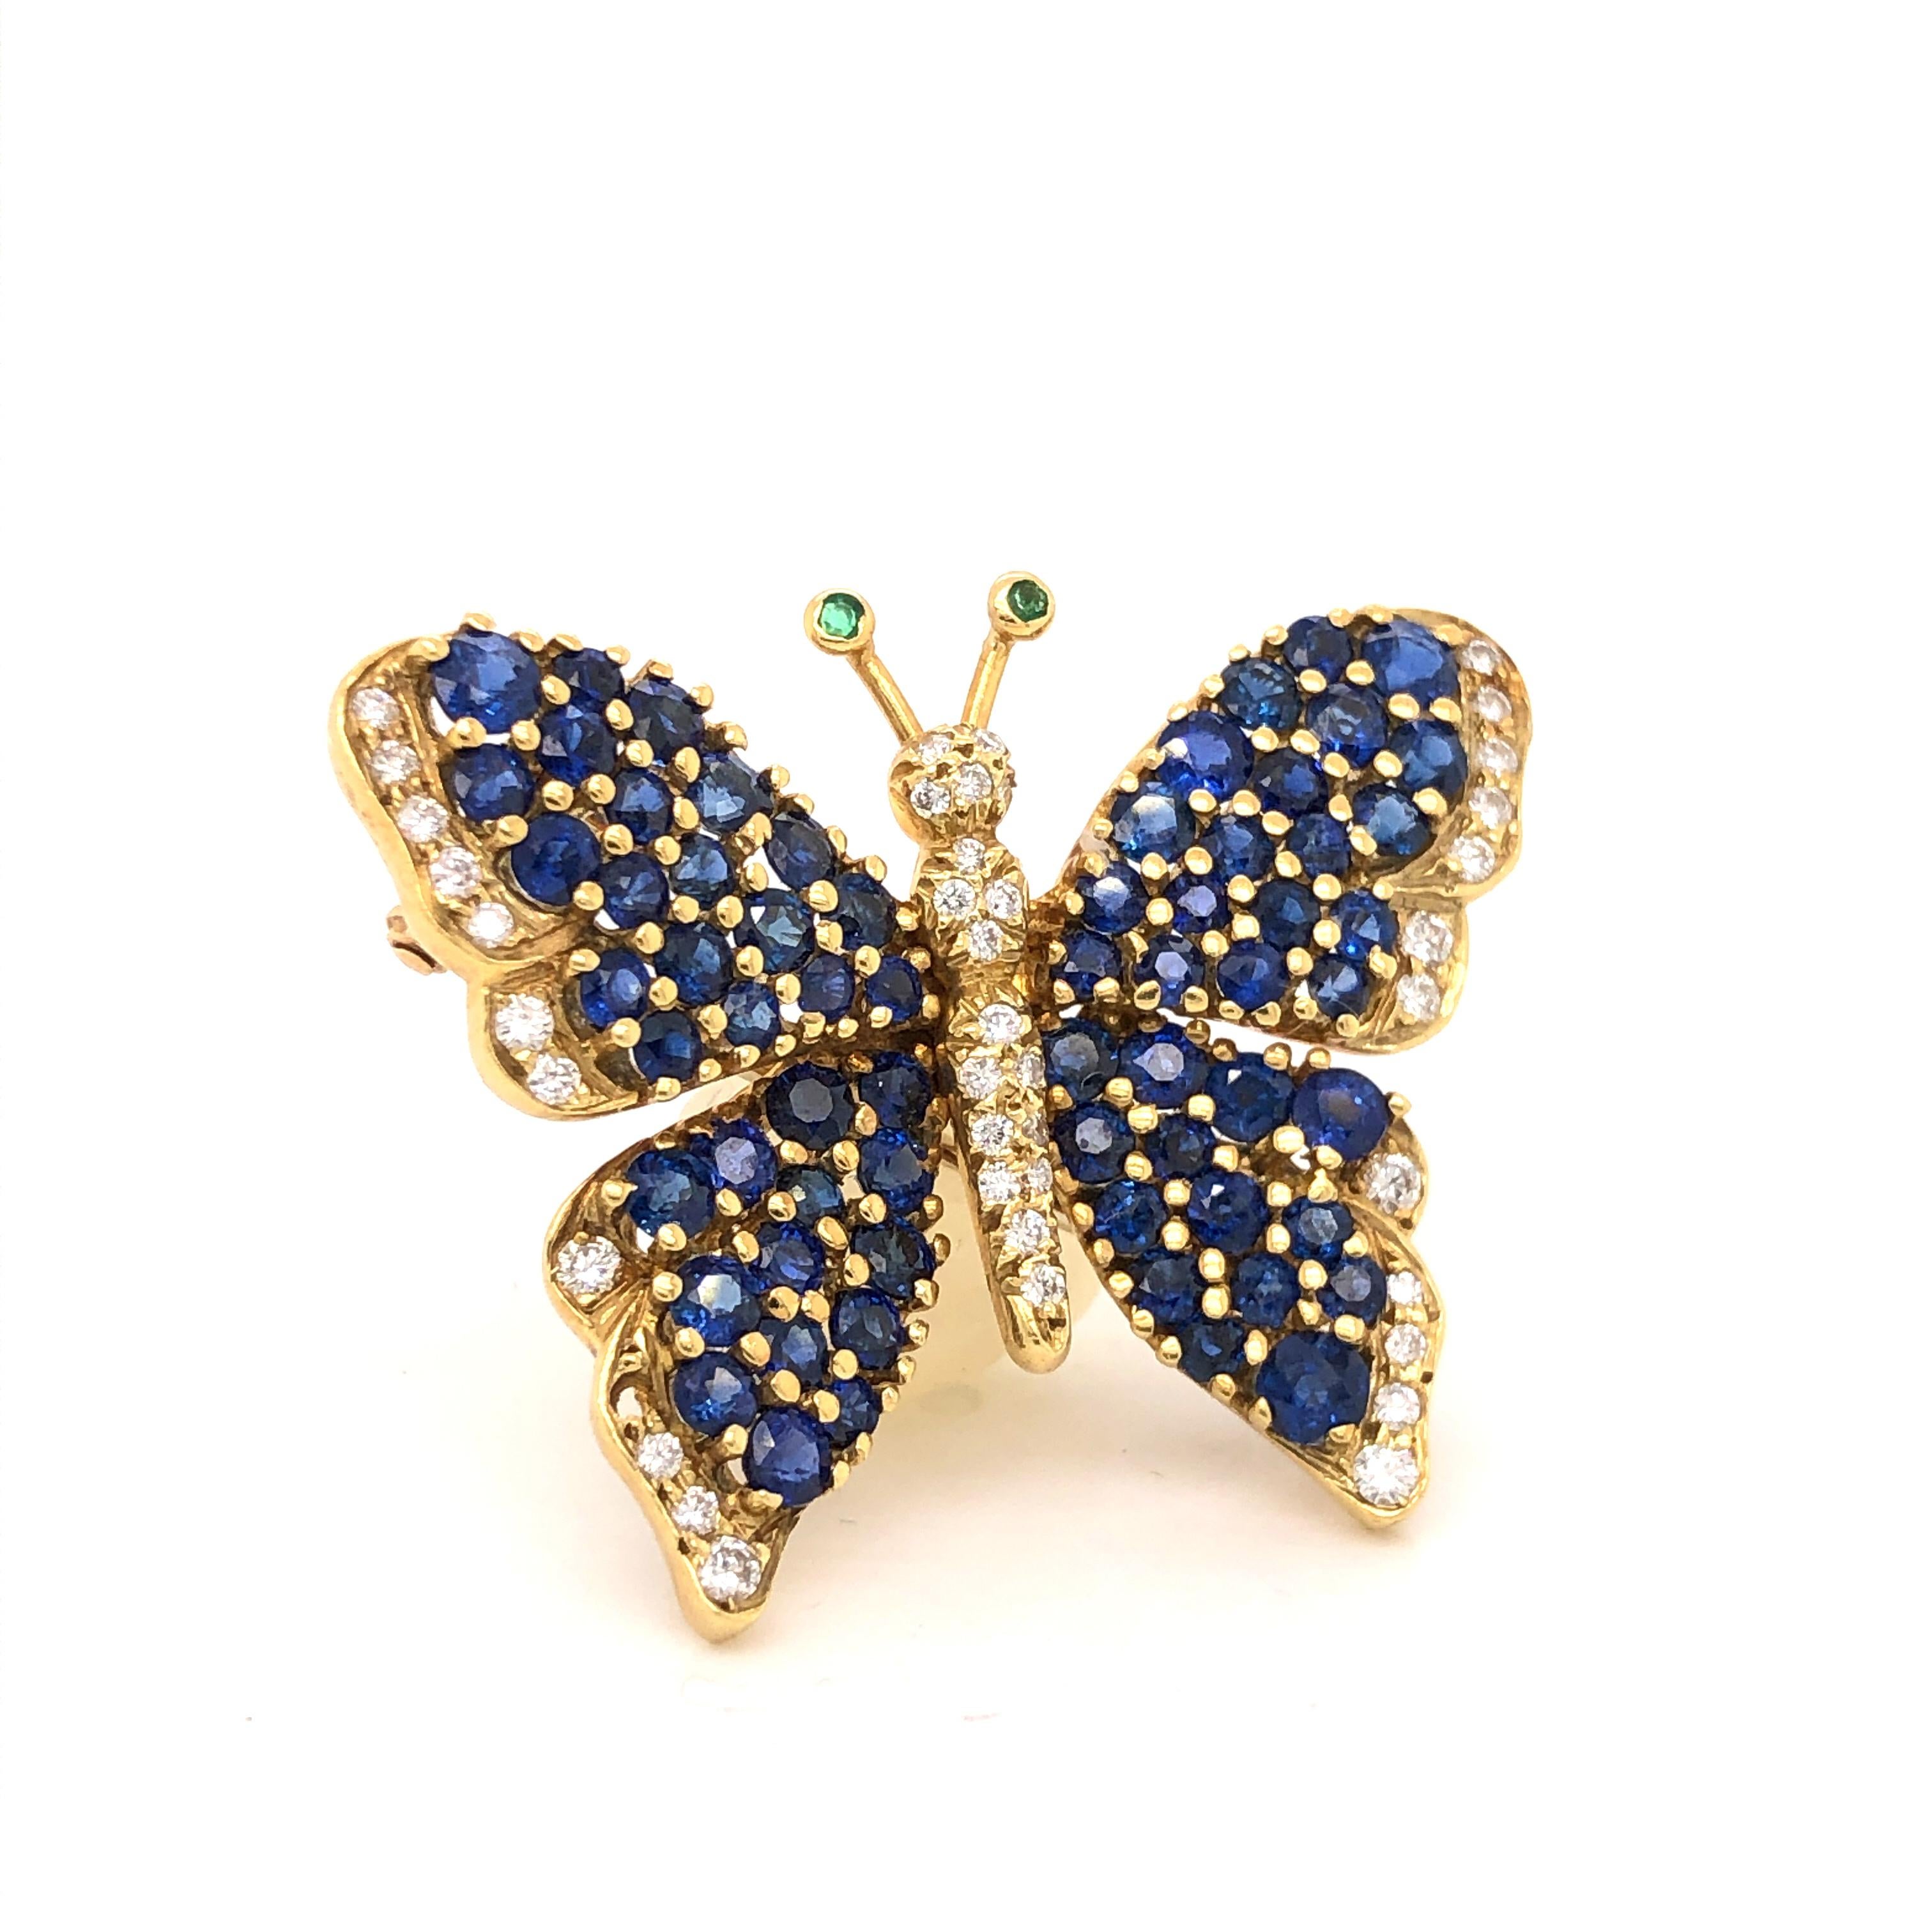 Amazing brooch from famed designer Tiffany & Co brooch is crafted in 18k yellow gold. This brilliant Butterfly design pops with color and is a true masterpiece. The brooch is set with sixty six natural Blue Sapphire across the wings all showing a